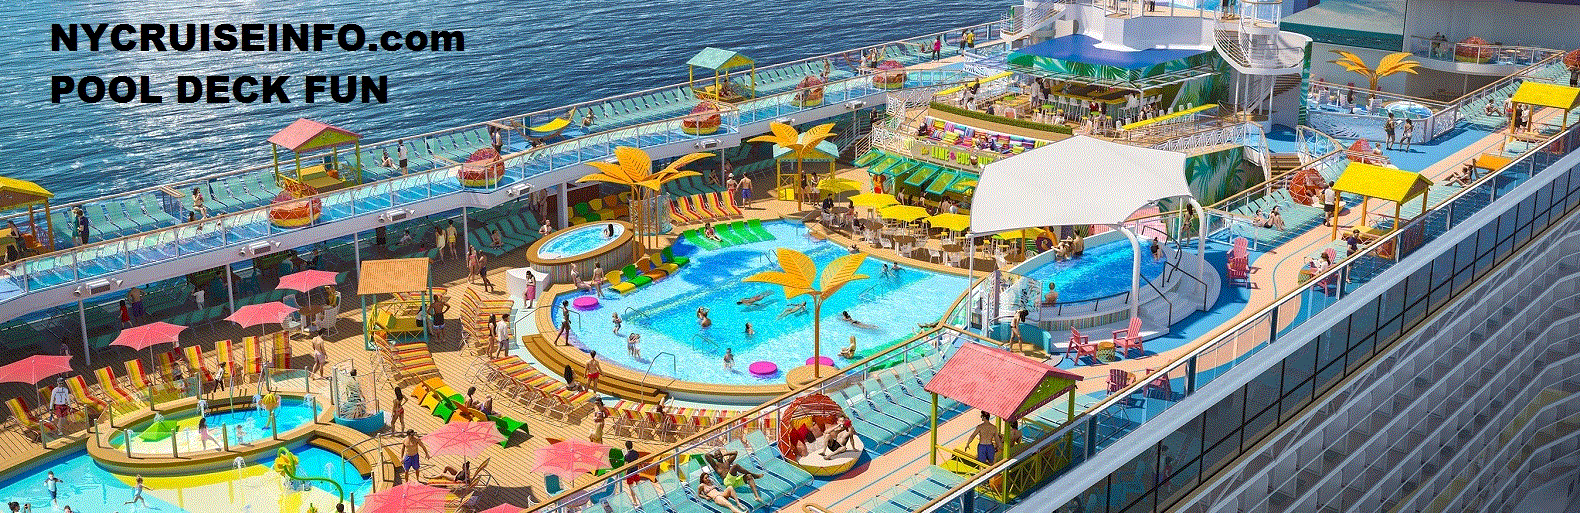 Pool Deck Royal Caribbeans Odyssey of the Seas